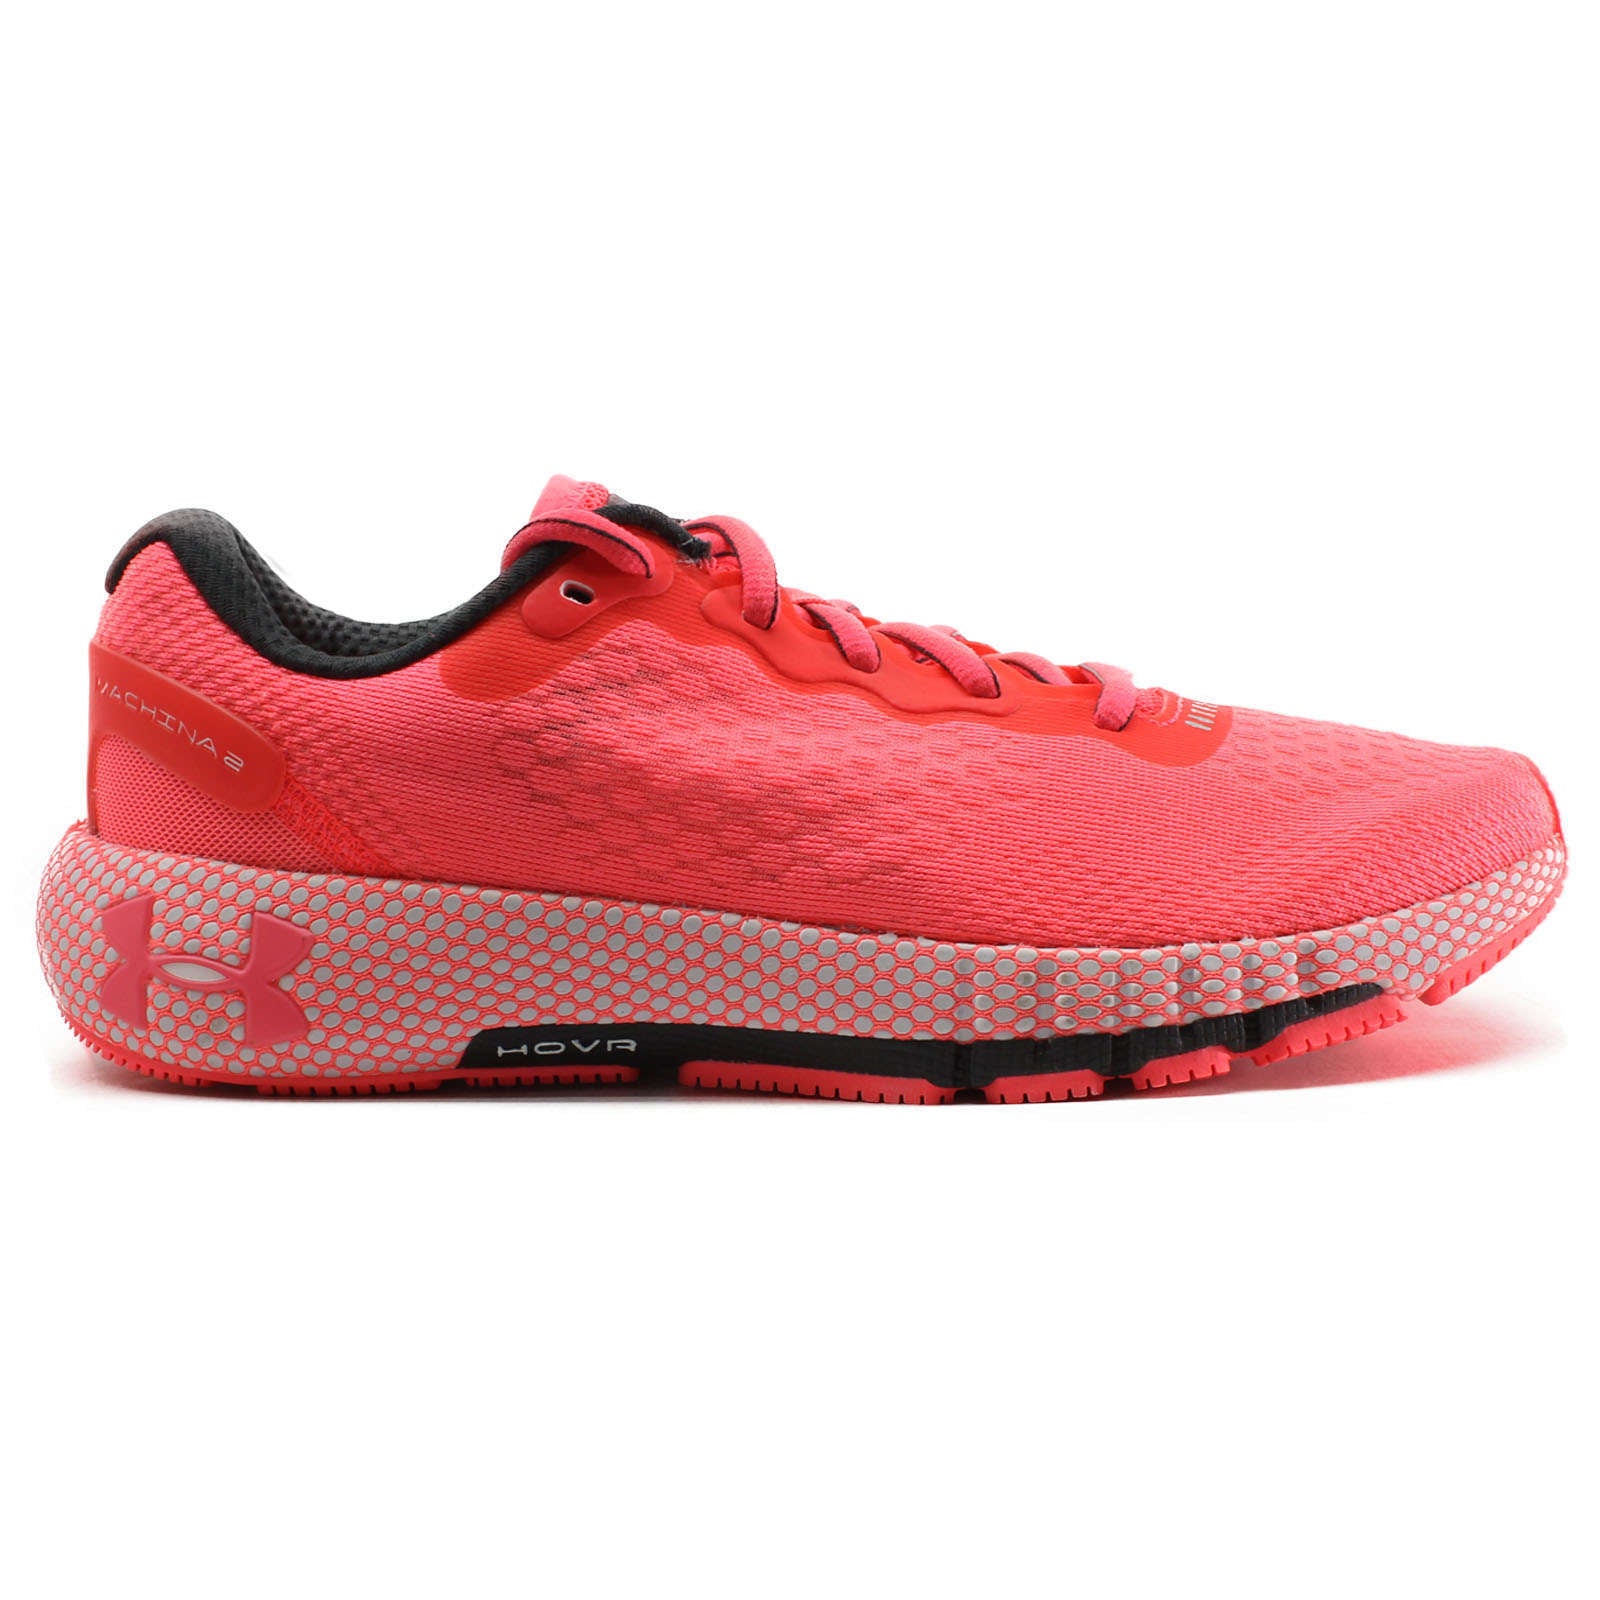 Under Armour HOVR Machina 2 Synthetic Textile Women's Low-Top Trainers#color_pink grey